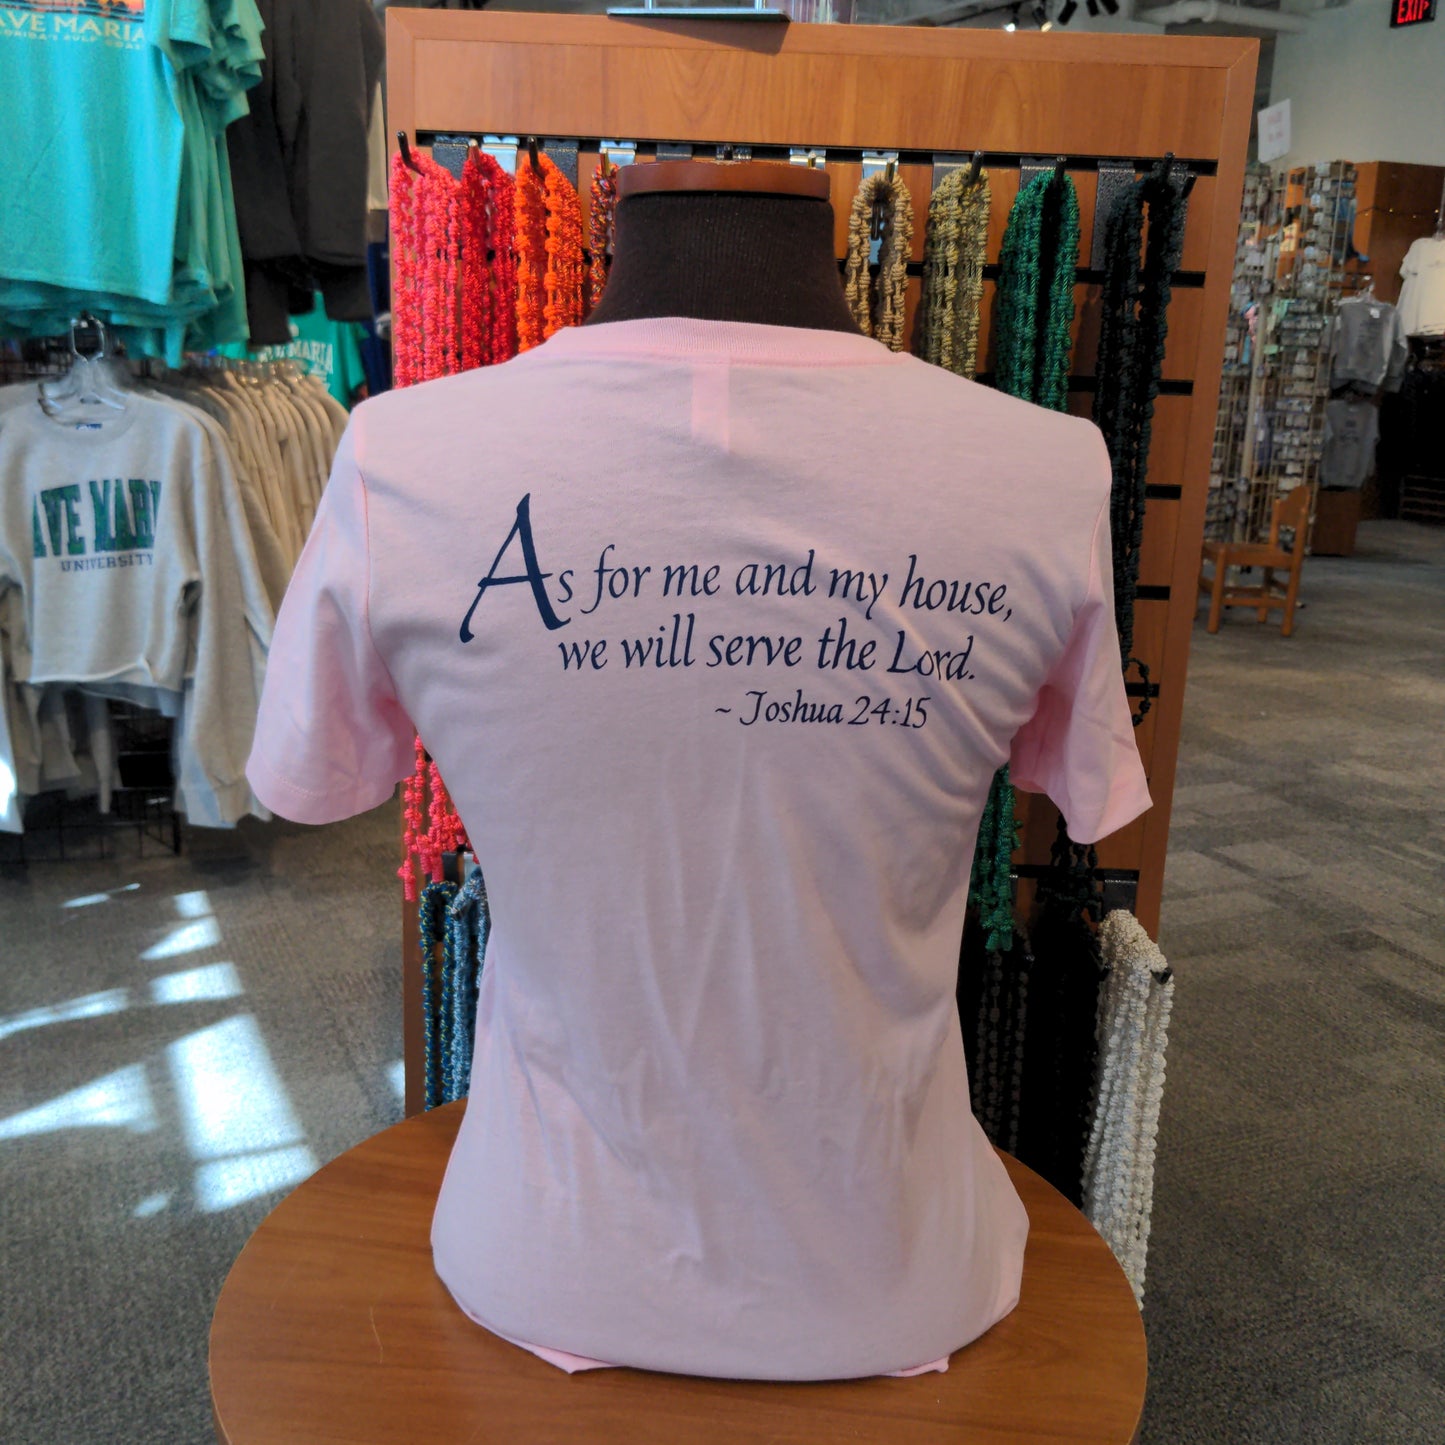 Ave Maria Florida Oratory tee - "As for me and my house, we will serve the Lord" Joshua 24:15